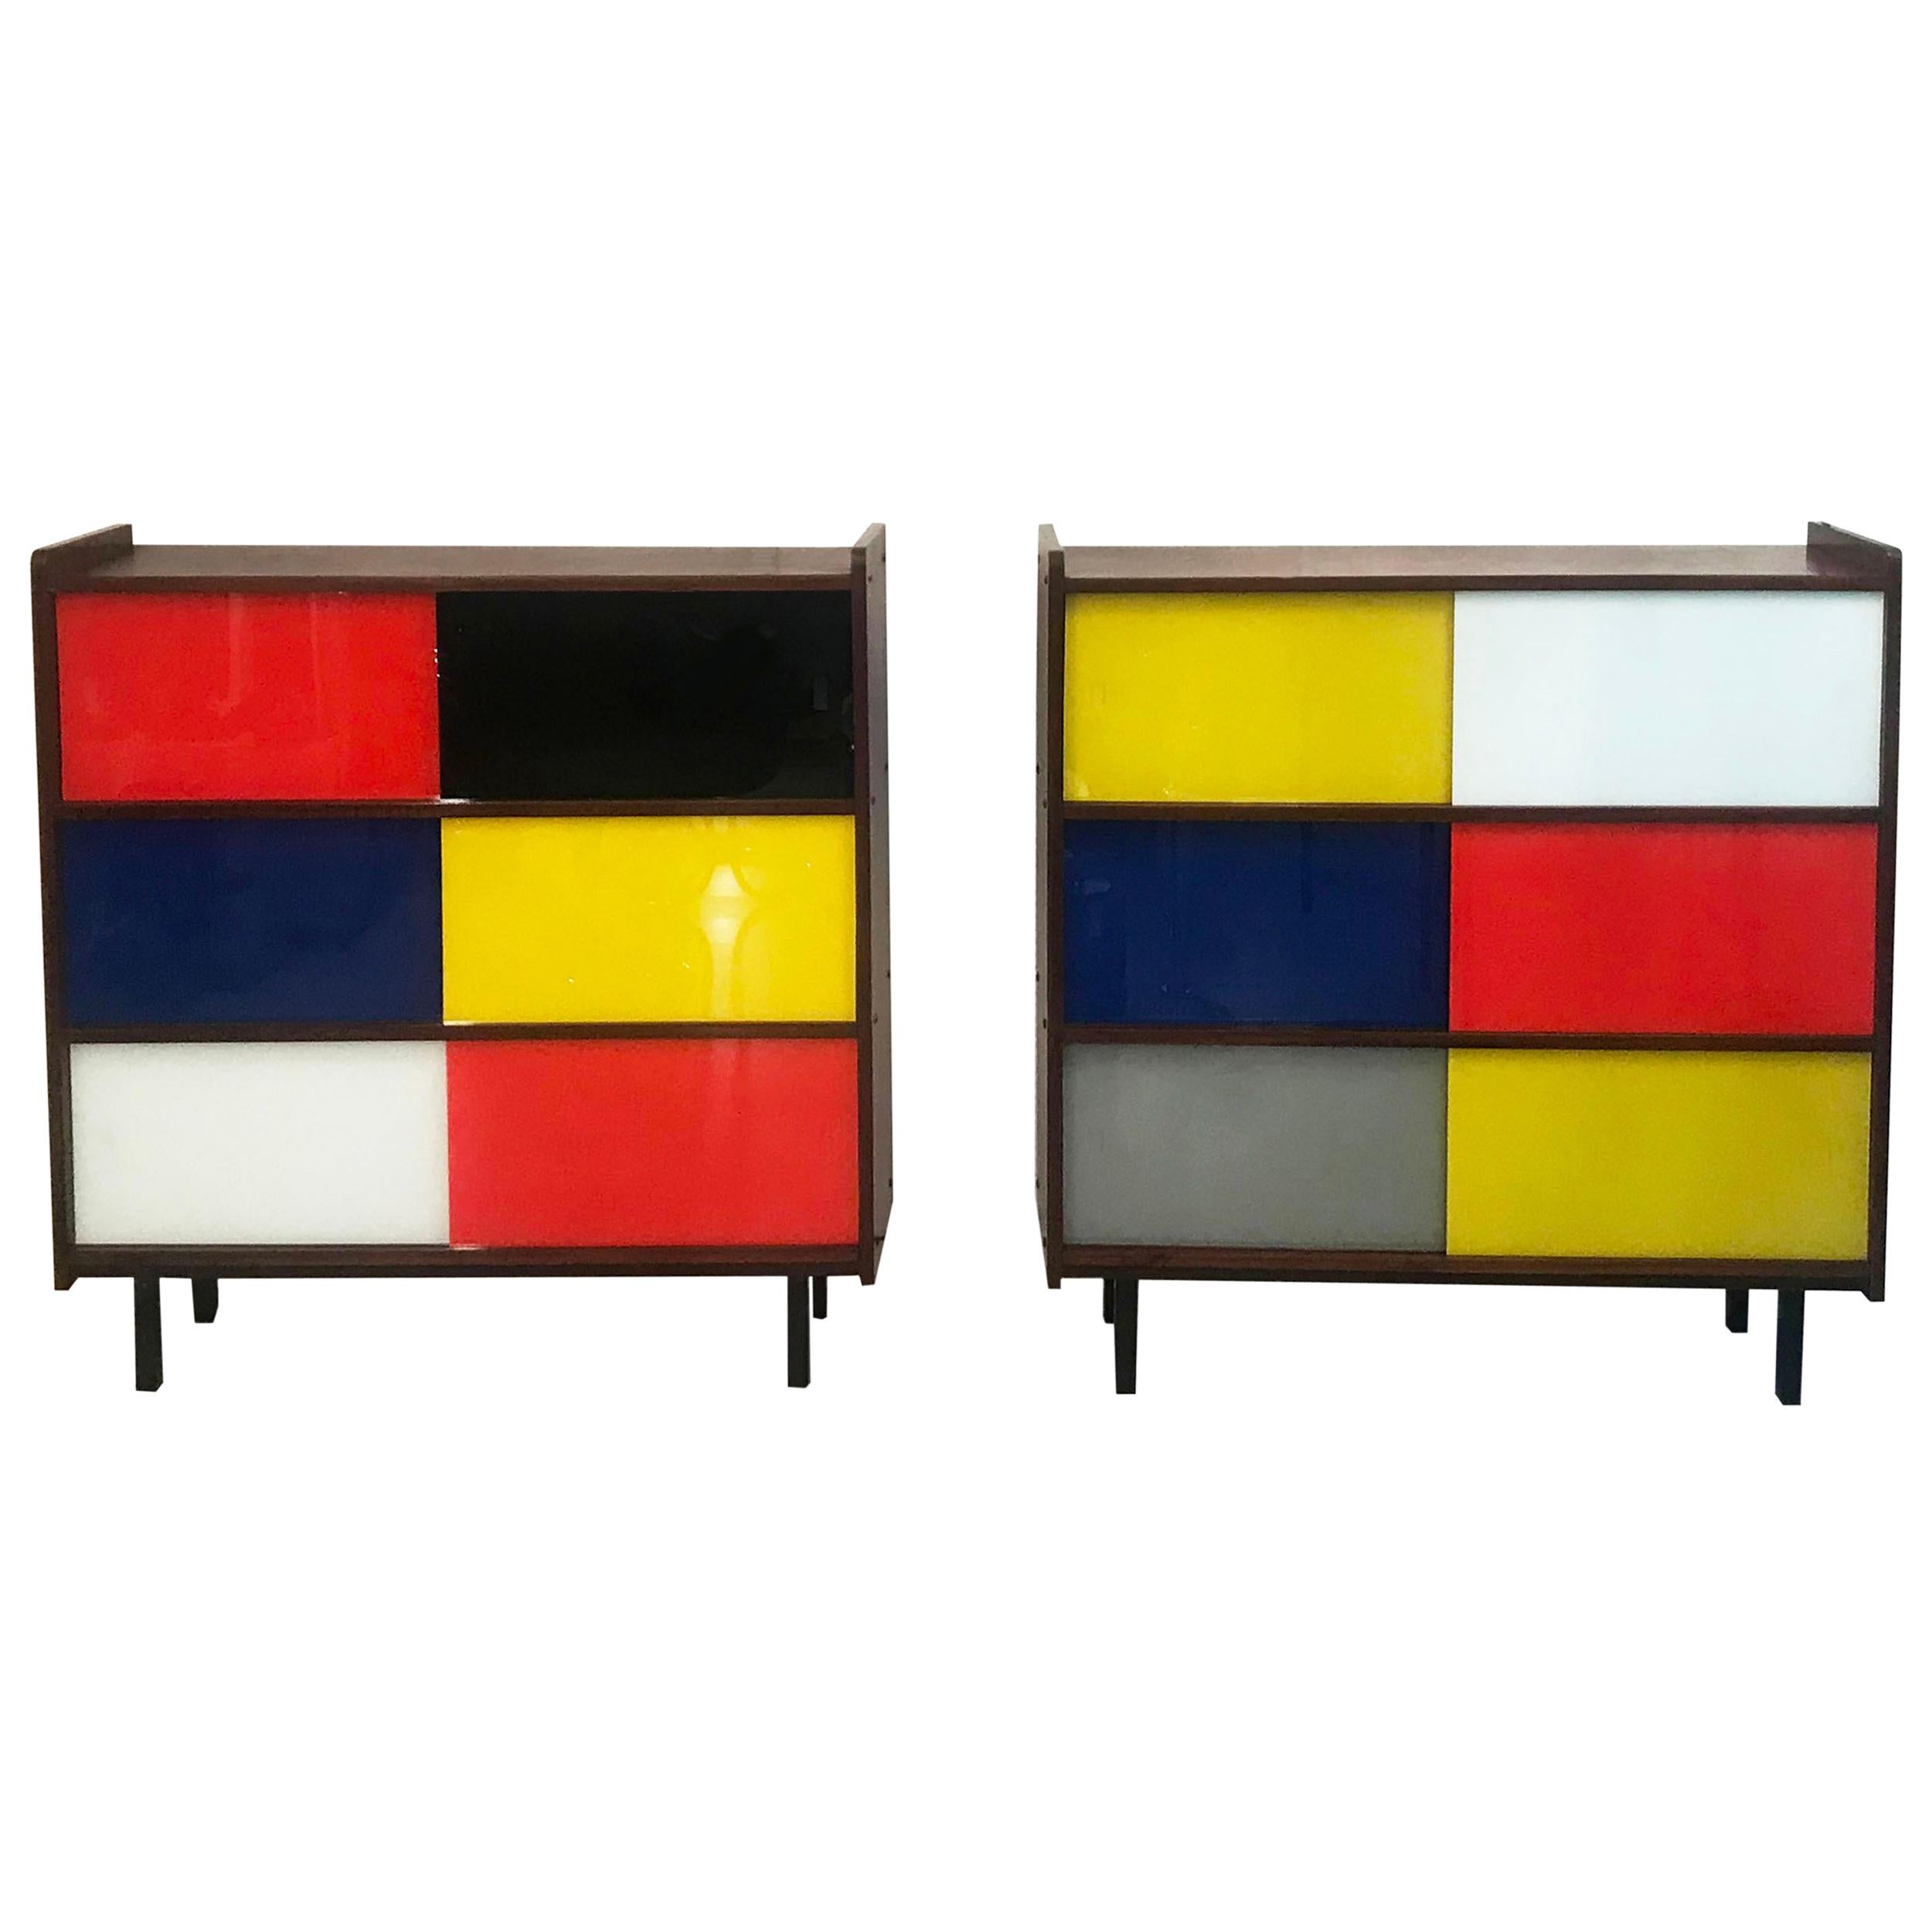 Pair of Small Storage Furniture in De Stijl or Mondrian Style